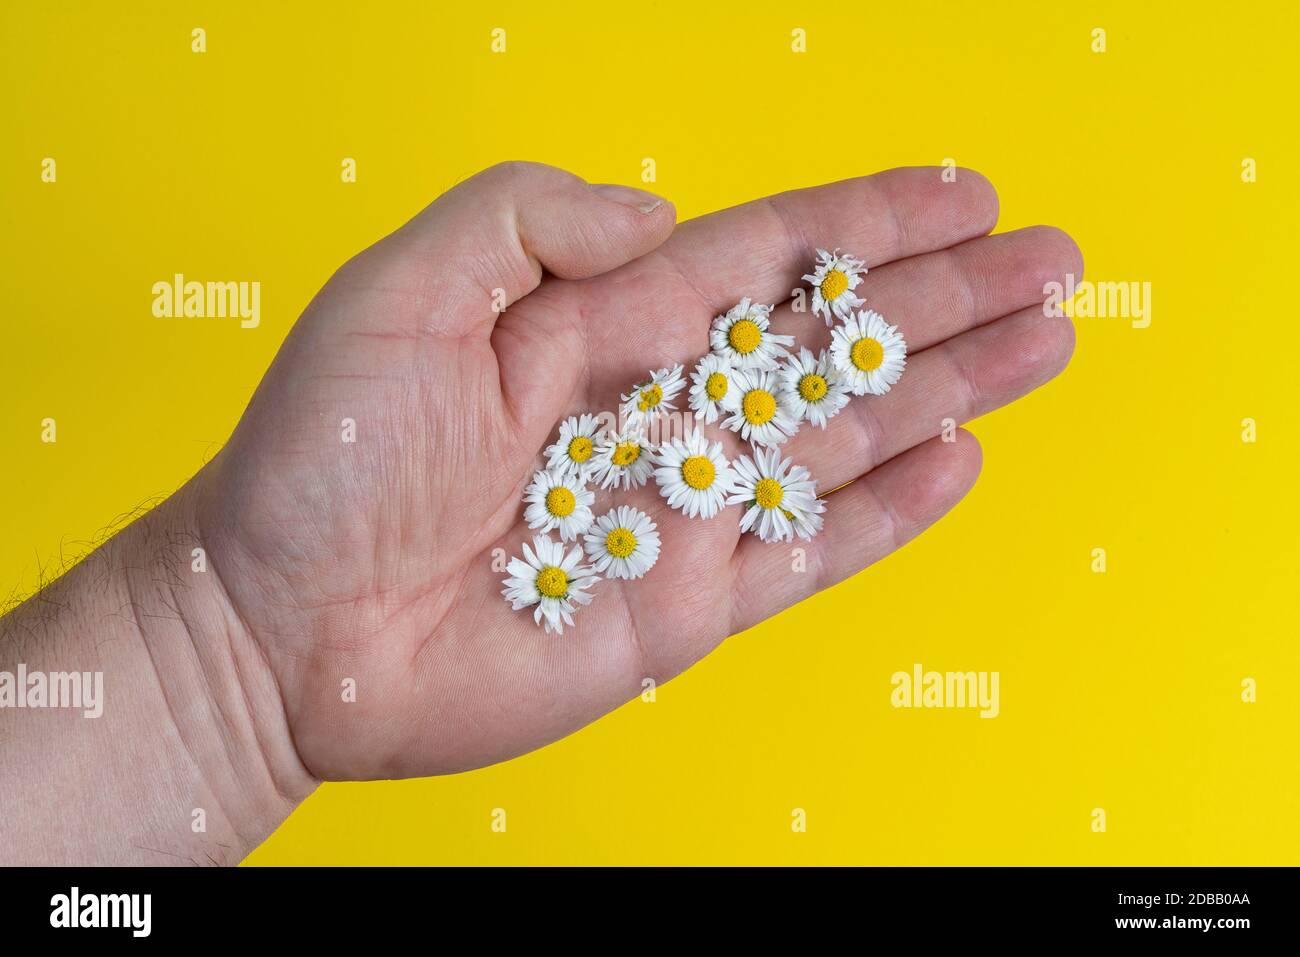 some daisies in a hand above on a yellow surface Stock Photo